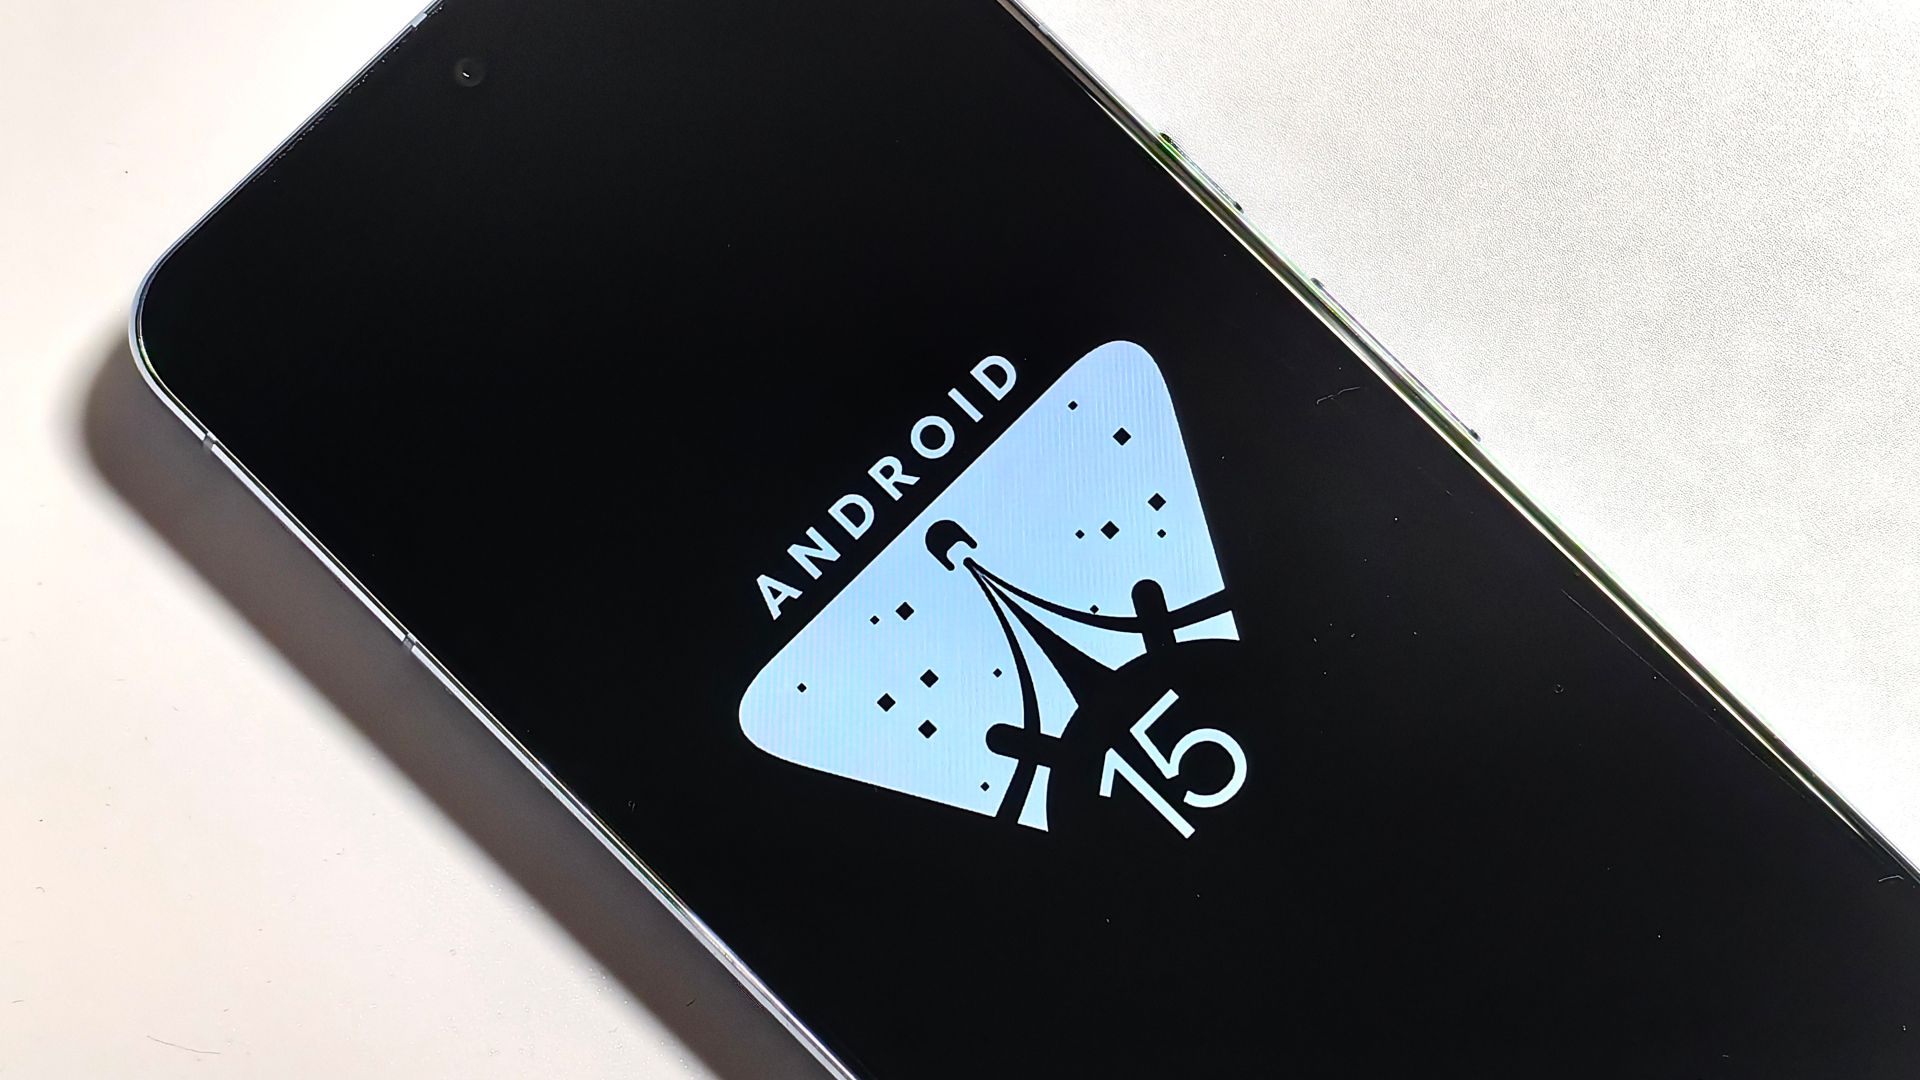 The Android 15 logo on a phone screen